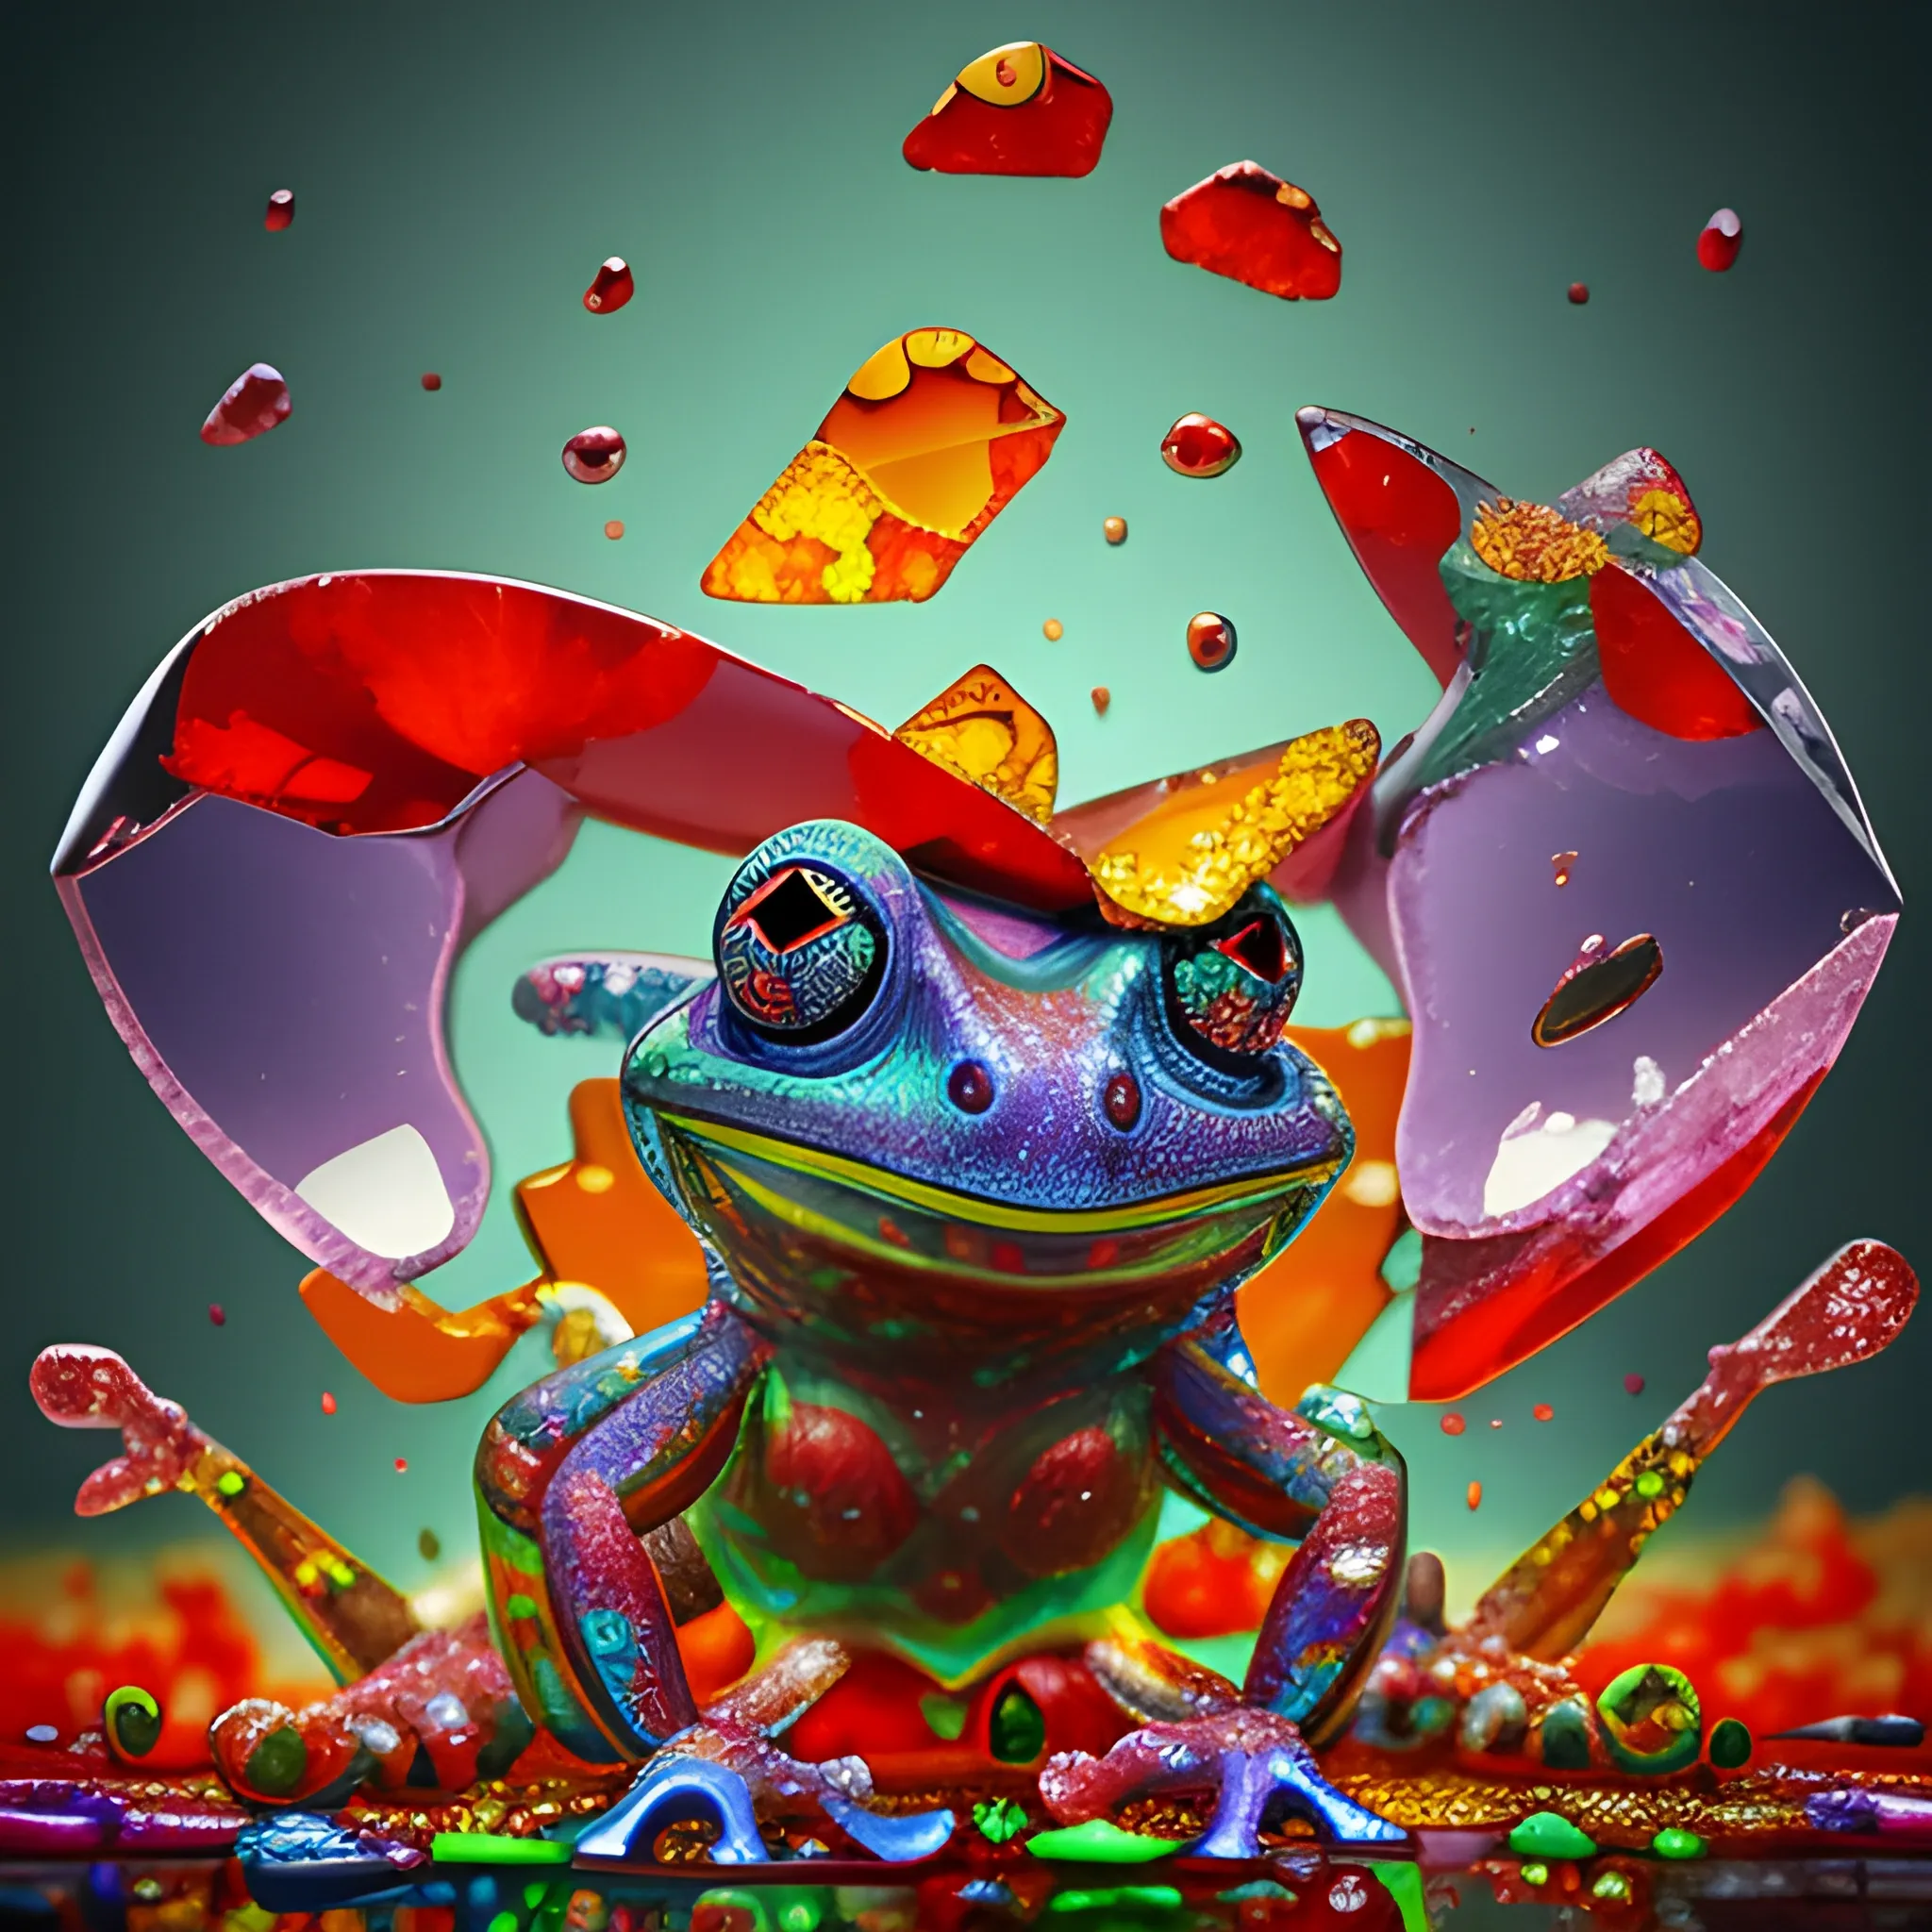 make a sculpture of many crystal crazy frogs, poppies around, many broken glass in the air, saturated colors
surrealism, chaotic background, 3D, Trippy,  eerie atmosphere, close up, Oil Painting, angular perspective 